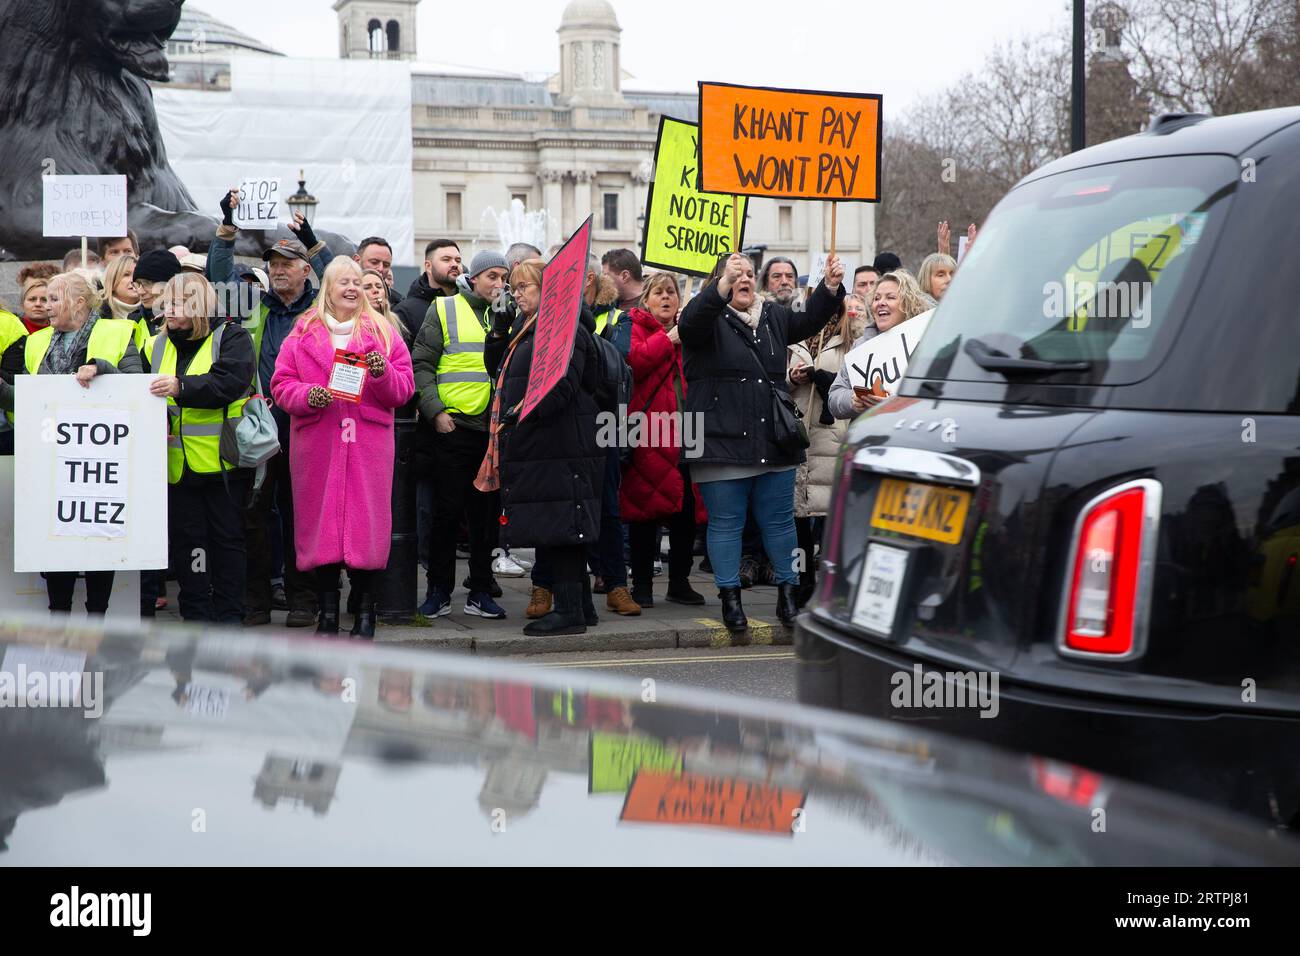 Participants gather with placards during a protest against the expansion of London's ultra-low emission zone (ULEZ) around Trafalgar Square in London. Stock Photo